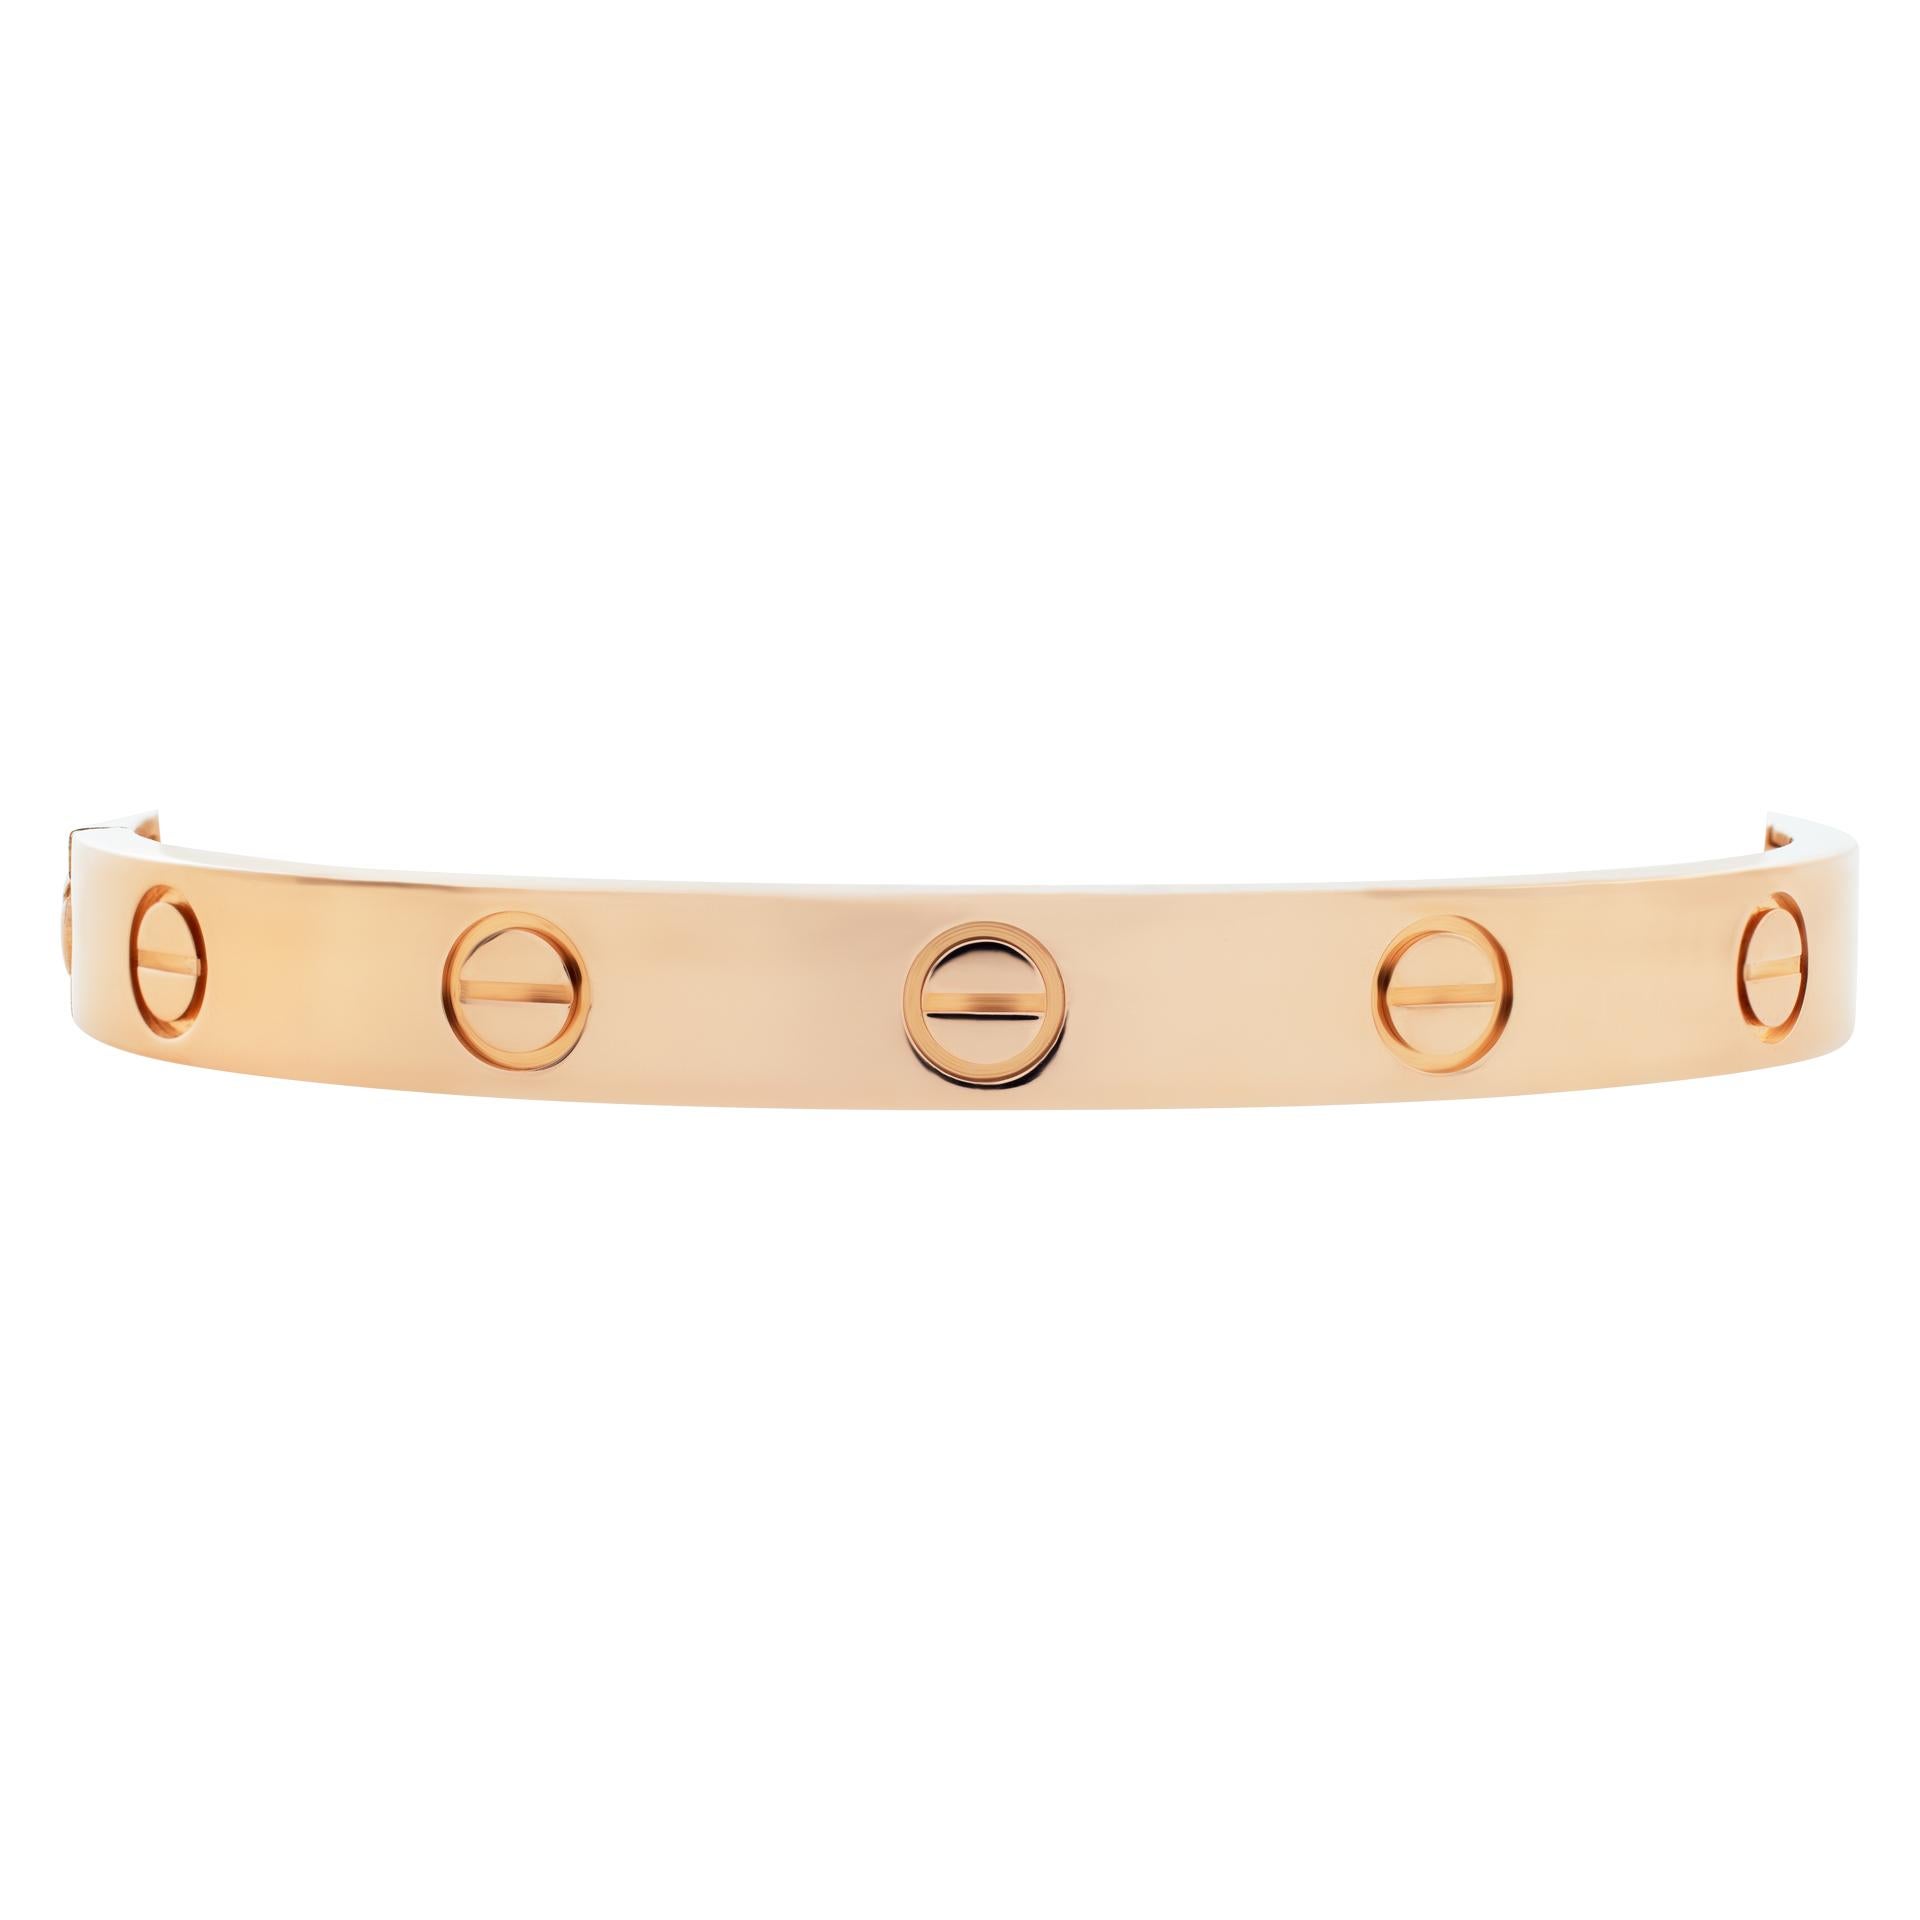 Cartier LOVE Bracelet in 18k rose gold, 6.1 mm width, Size 15. Ref B6067417 - Design was launched in NY in 1969 becoming an icon of jewelry design!